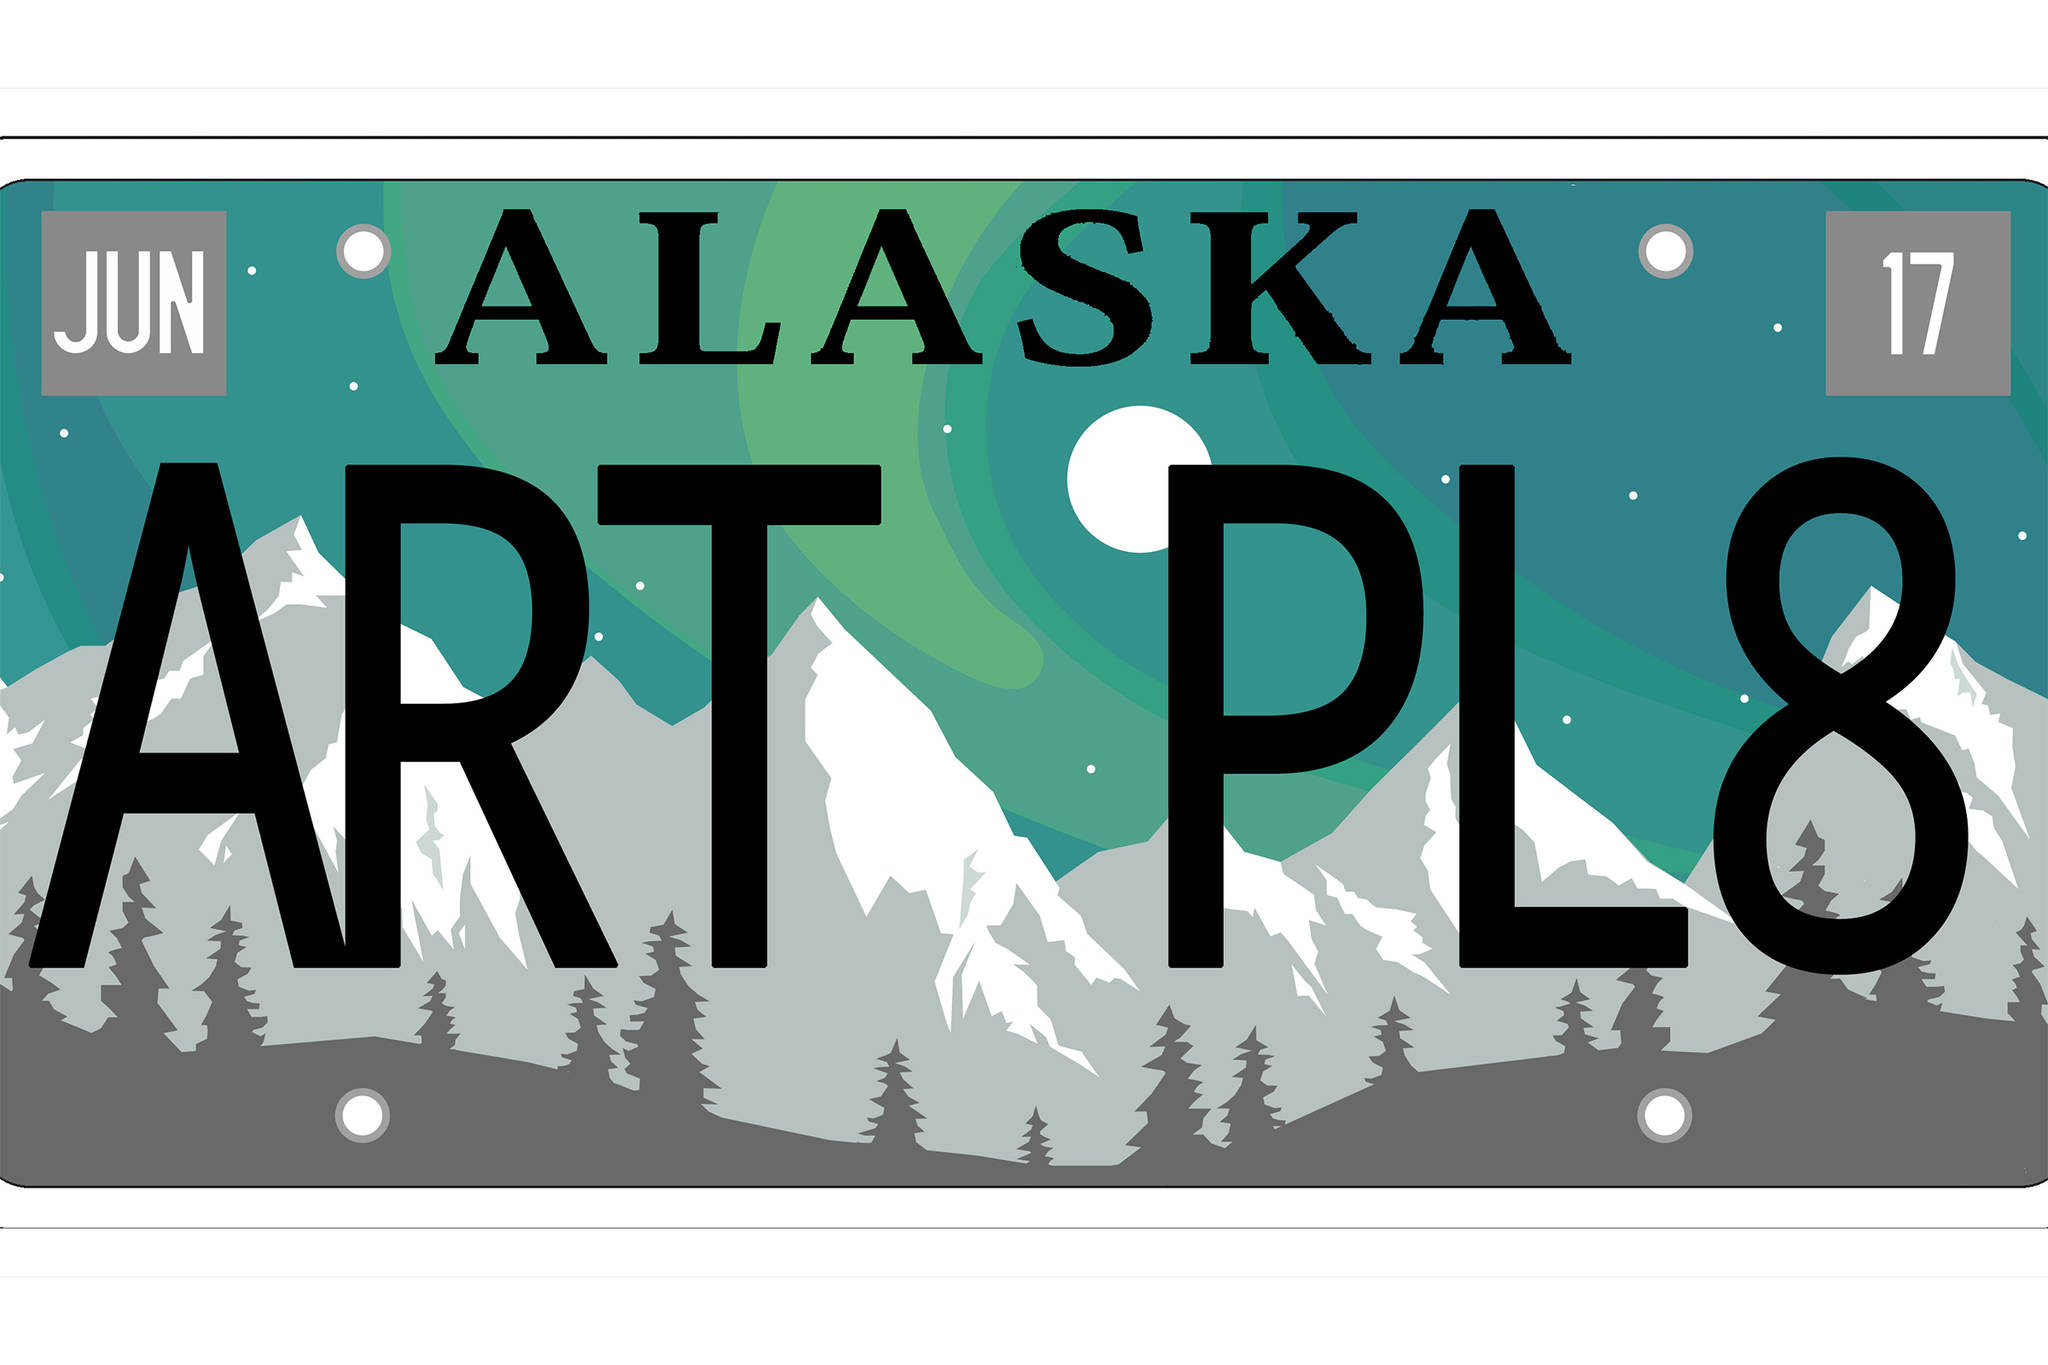 This license plate was designed by Anita Laulainen and was the winning design in the 2017 Alaska Artistic License competition. A surcharge could be attached to plates like this one if a bill heard by the Senate Education Committee Thursday becomes law. The additional charge could be used to provide funding for the Alaska State Council on the Arts. (Courtesy Photo | Alaska State Council on the Arts)